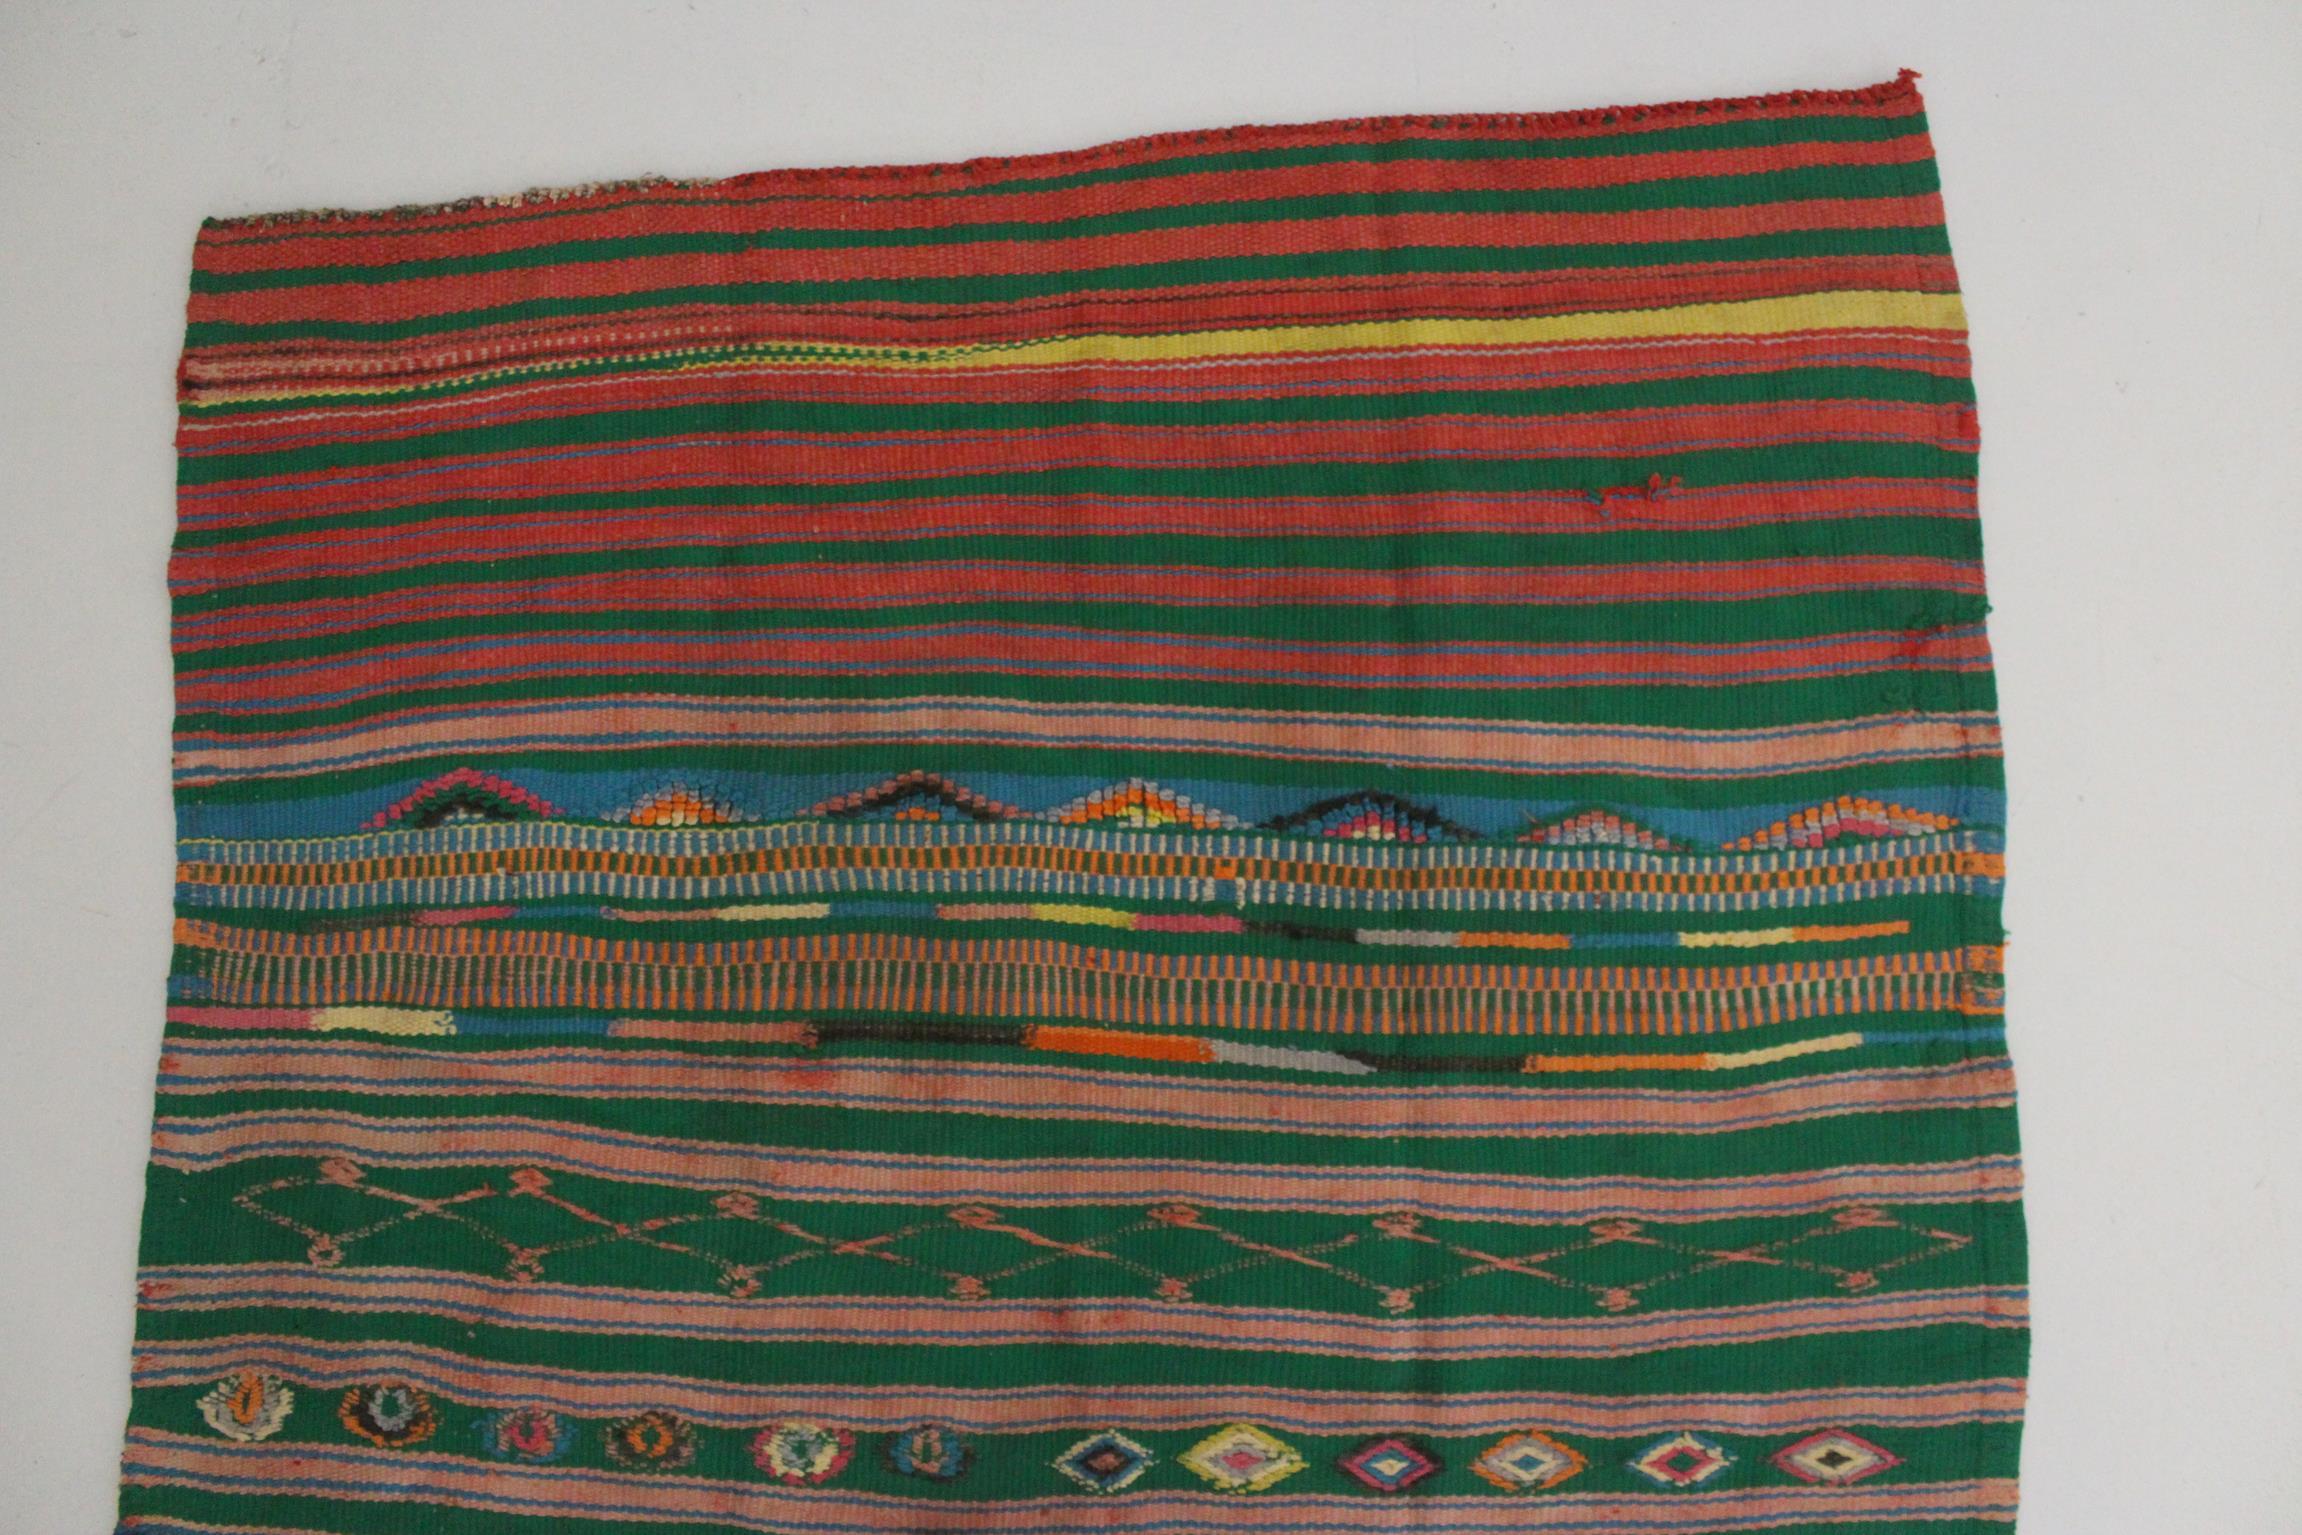 Vintage Moroccan striped kilim rug - Green/pink/red - 5.1x10.2feet / 157x312cm For Sale 2